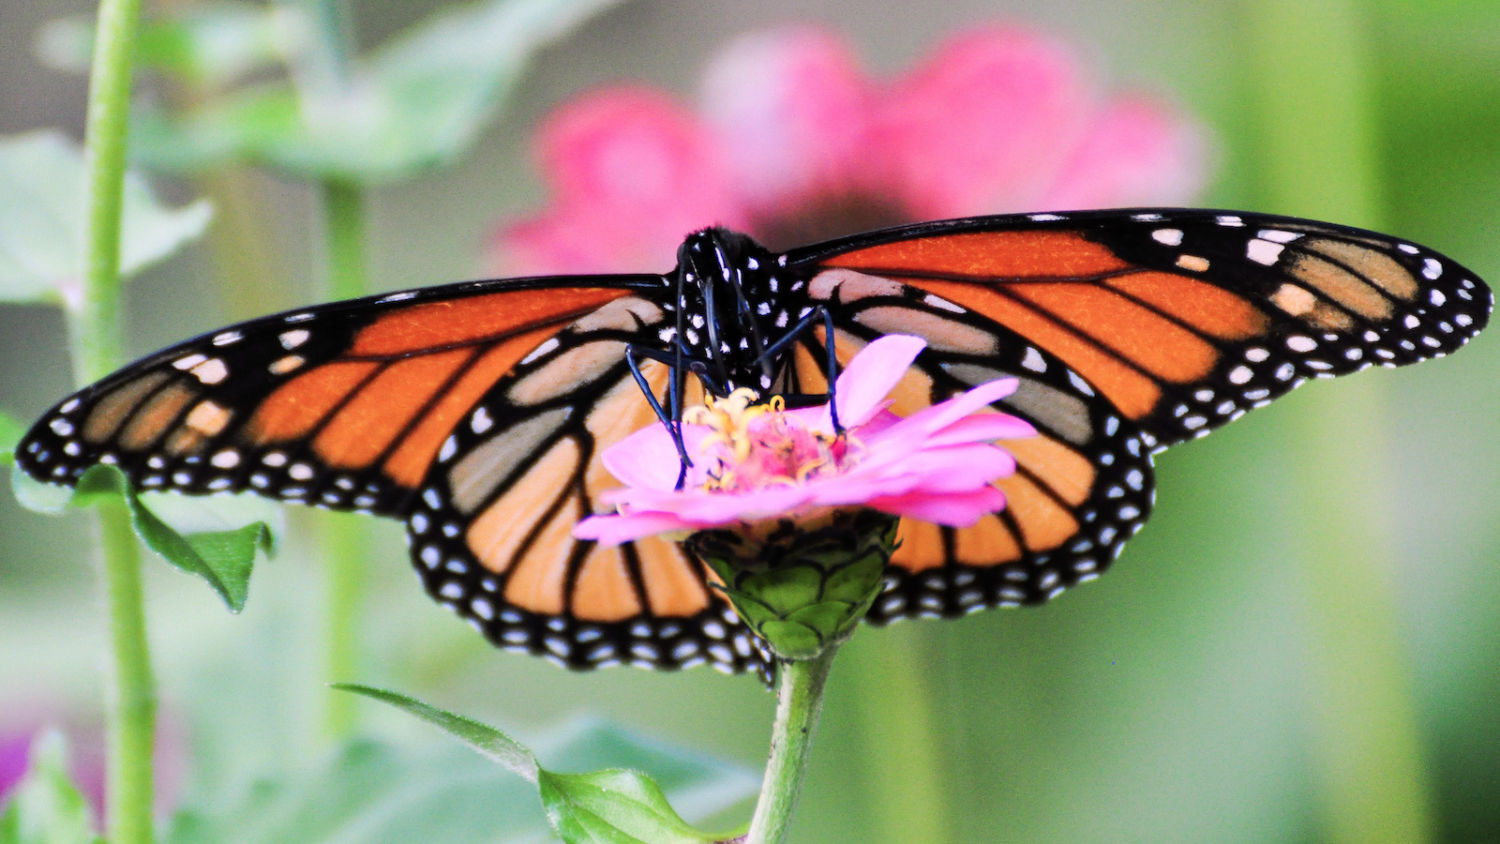 Eastern Monarch Butterfly Population Holds Steady